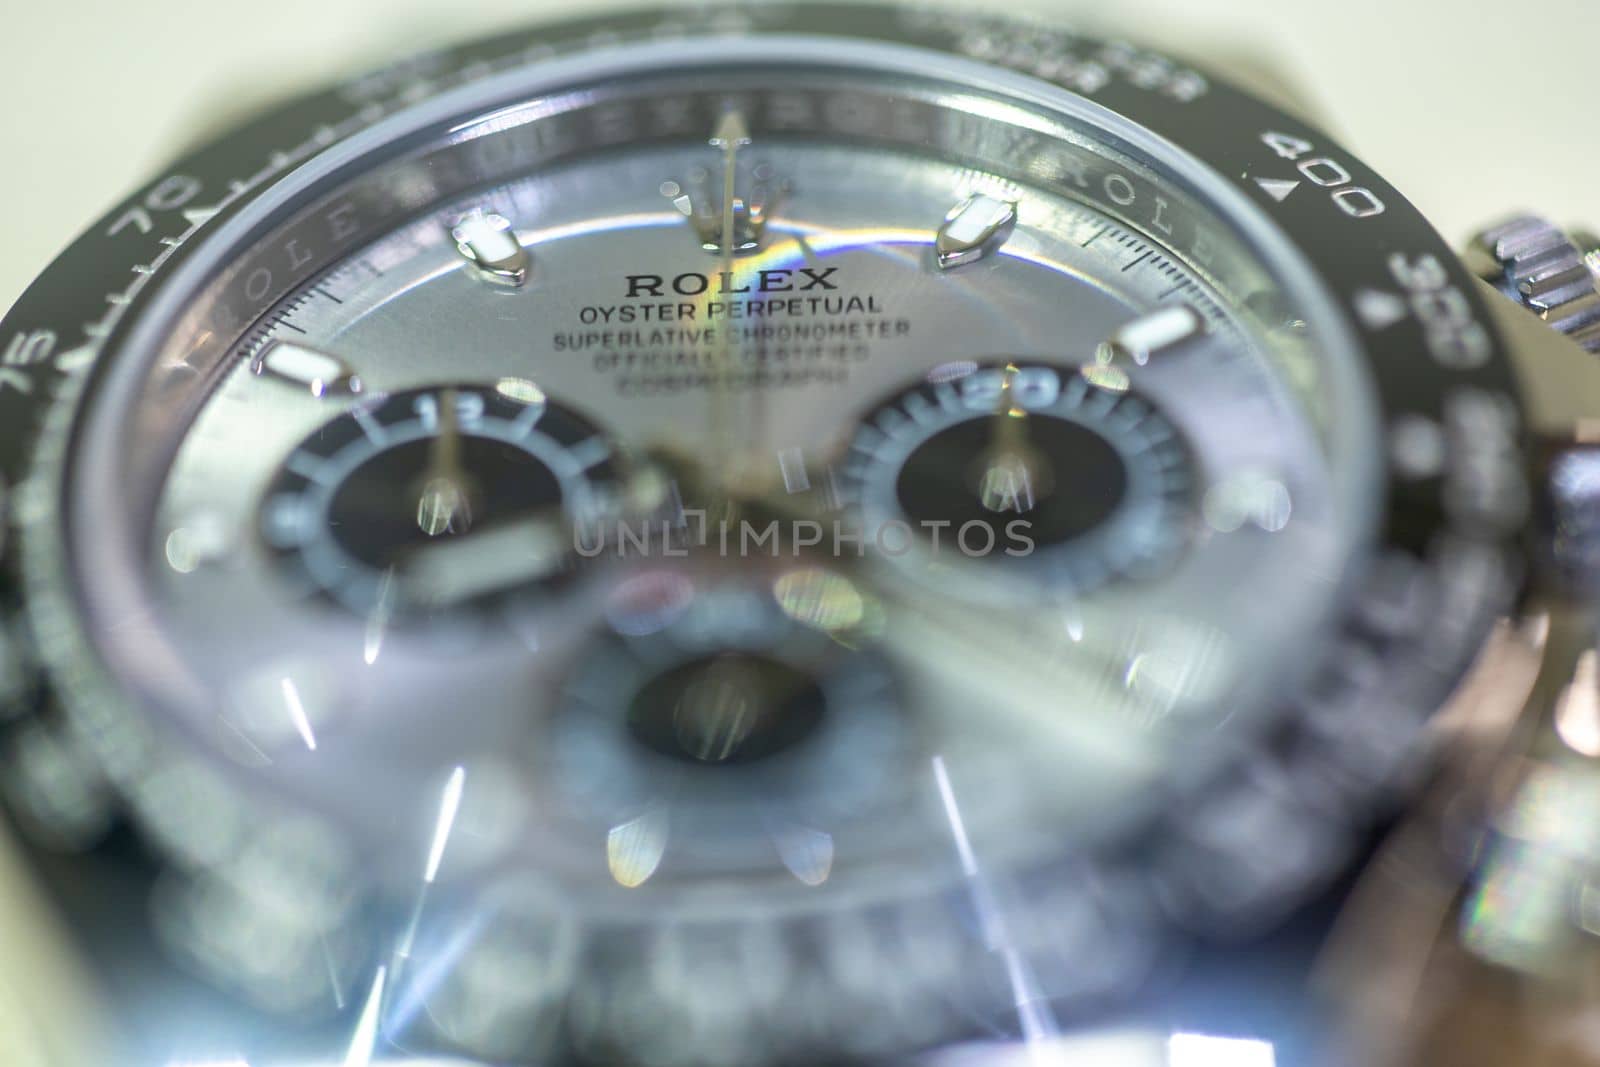 LJUBLJANA, SLOVENIA - December 12, 2021: Luxury watch Rolex Oyster Perpetual close up with selective focus by Chechotkin